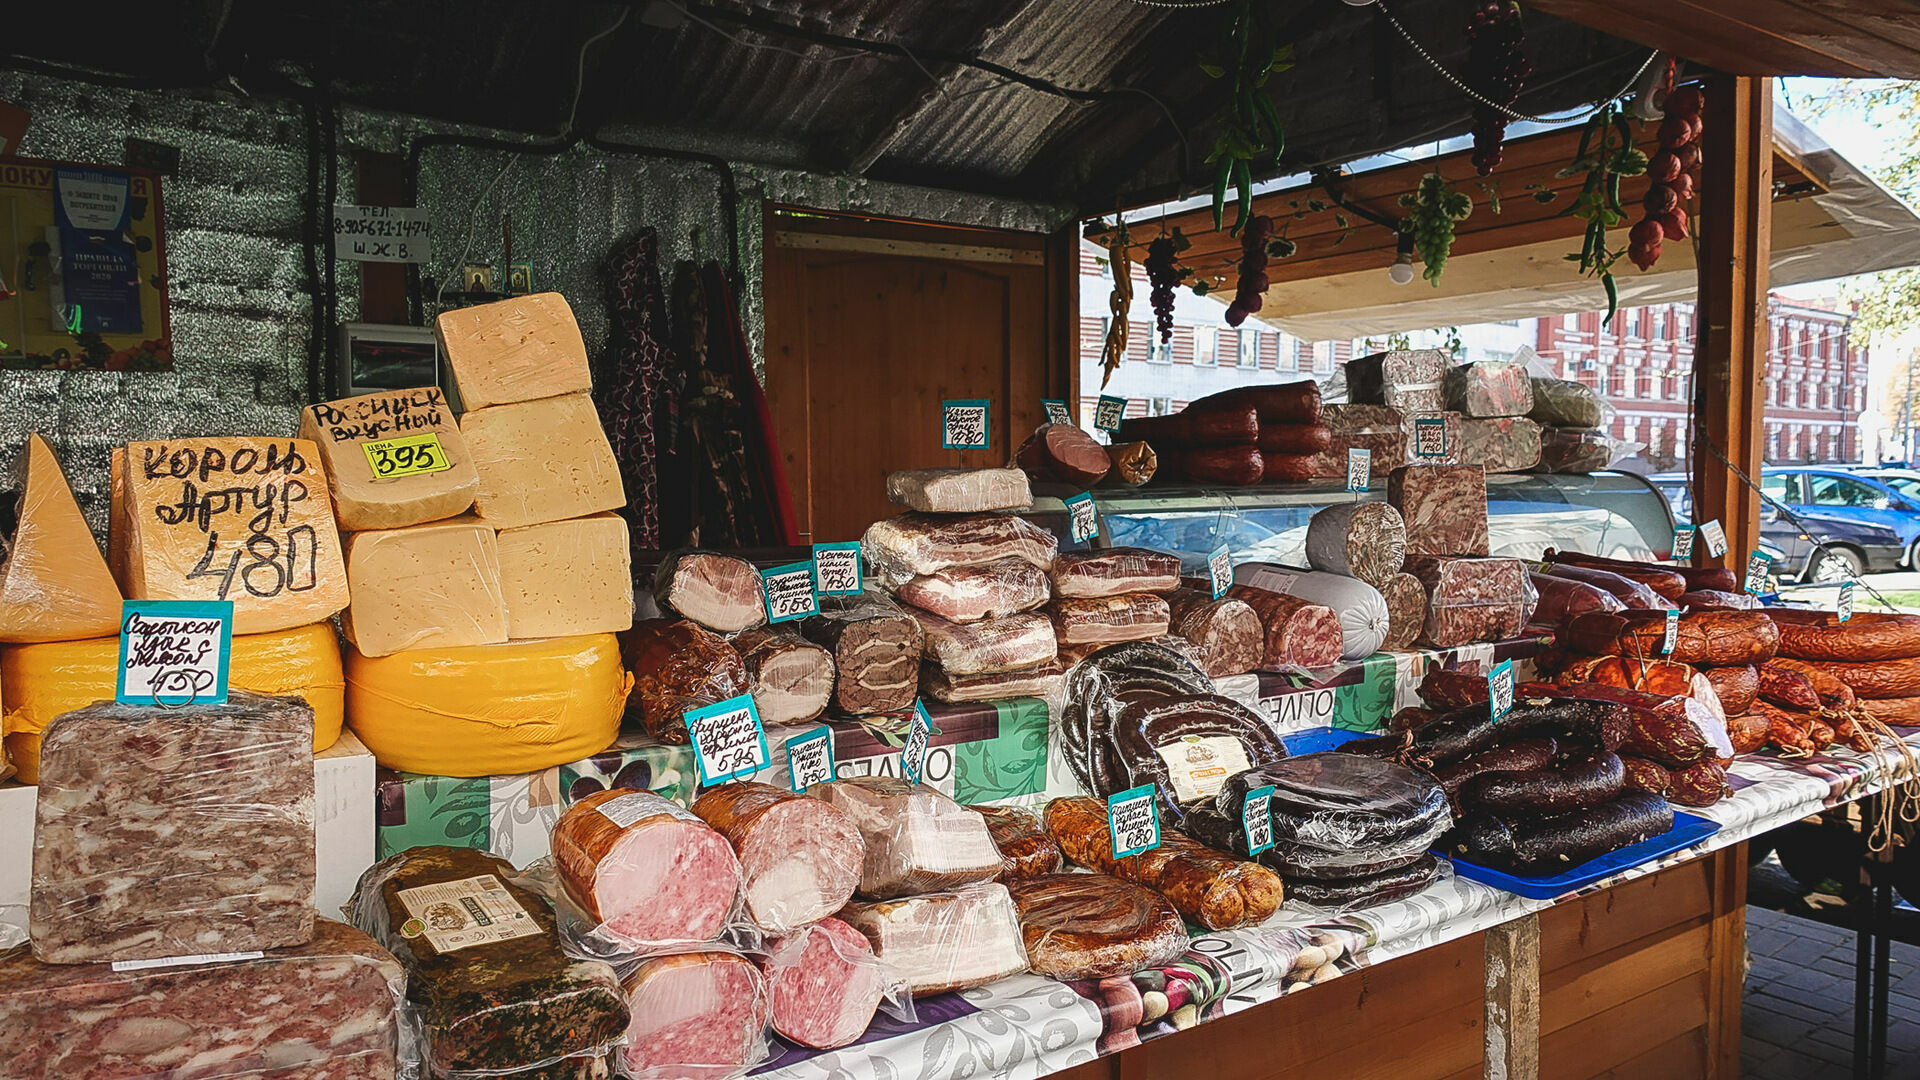 The desired forbidden: where in Russia to find real parmesan and jamon